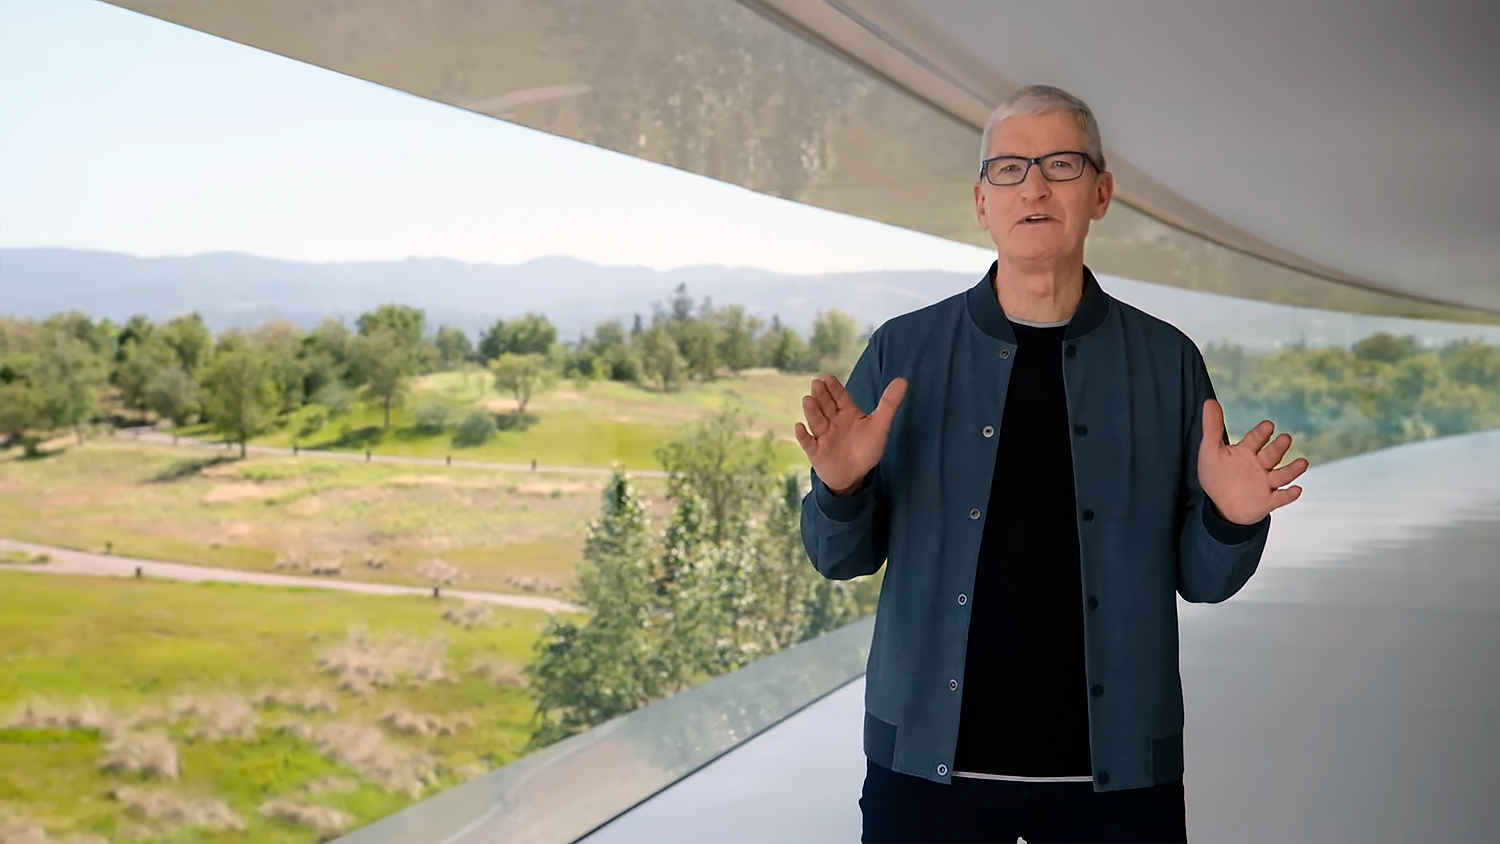 Tim Cook at WWDC 2022.